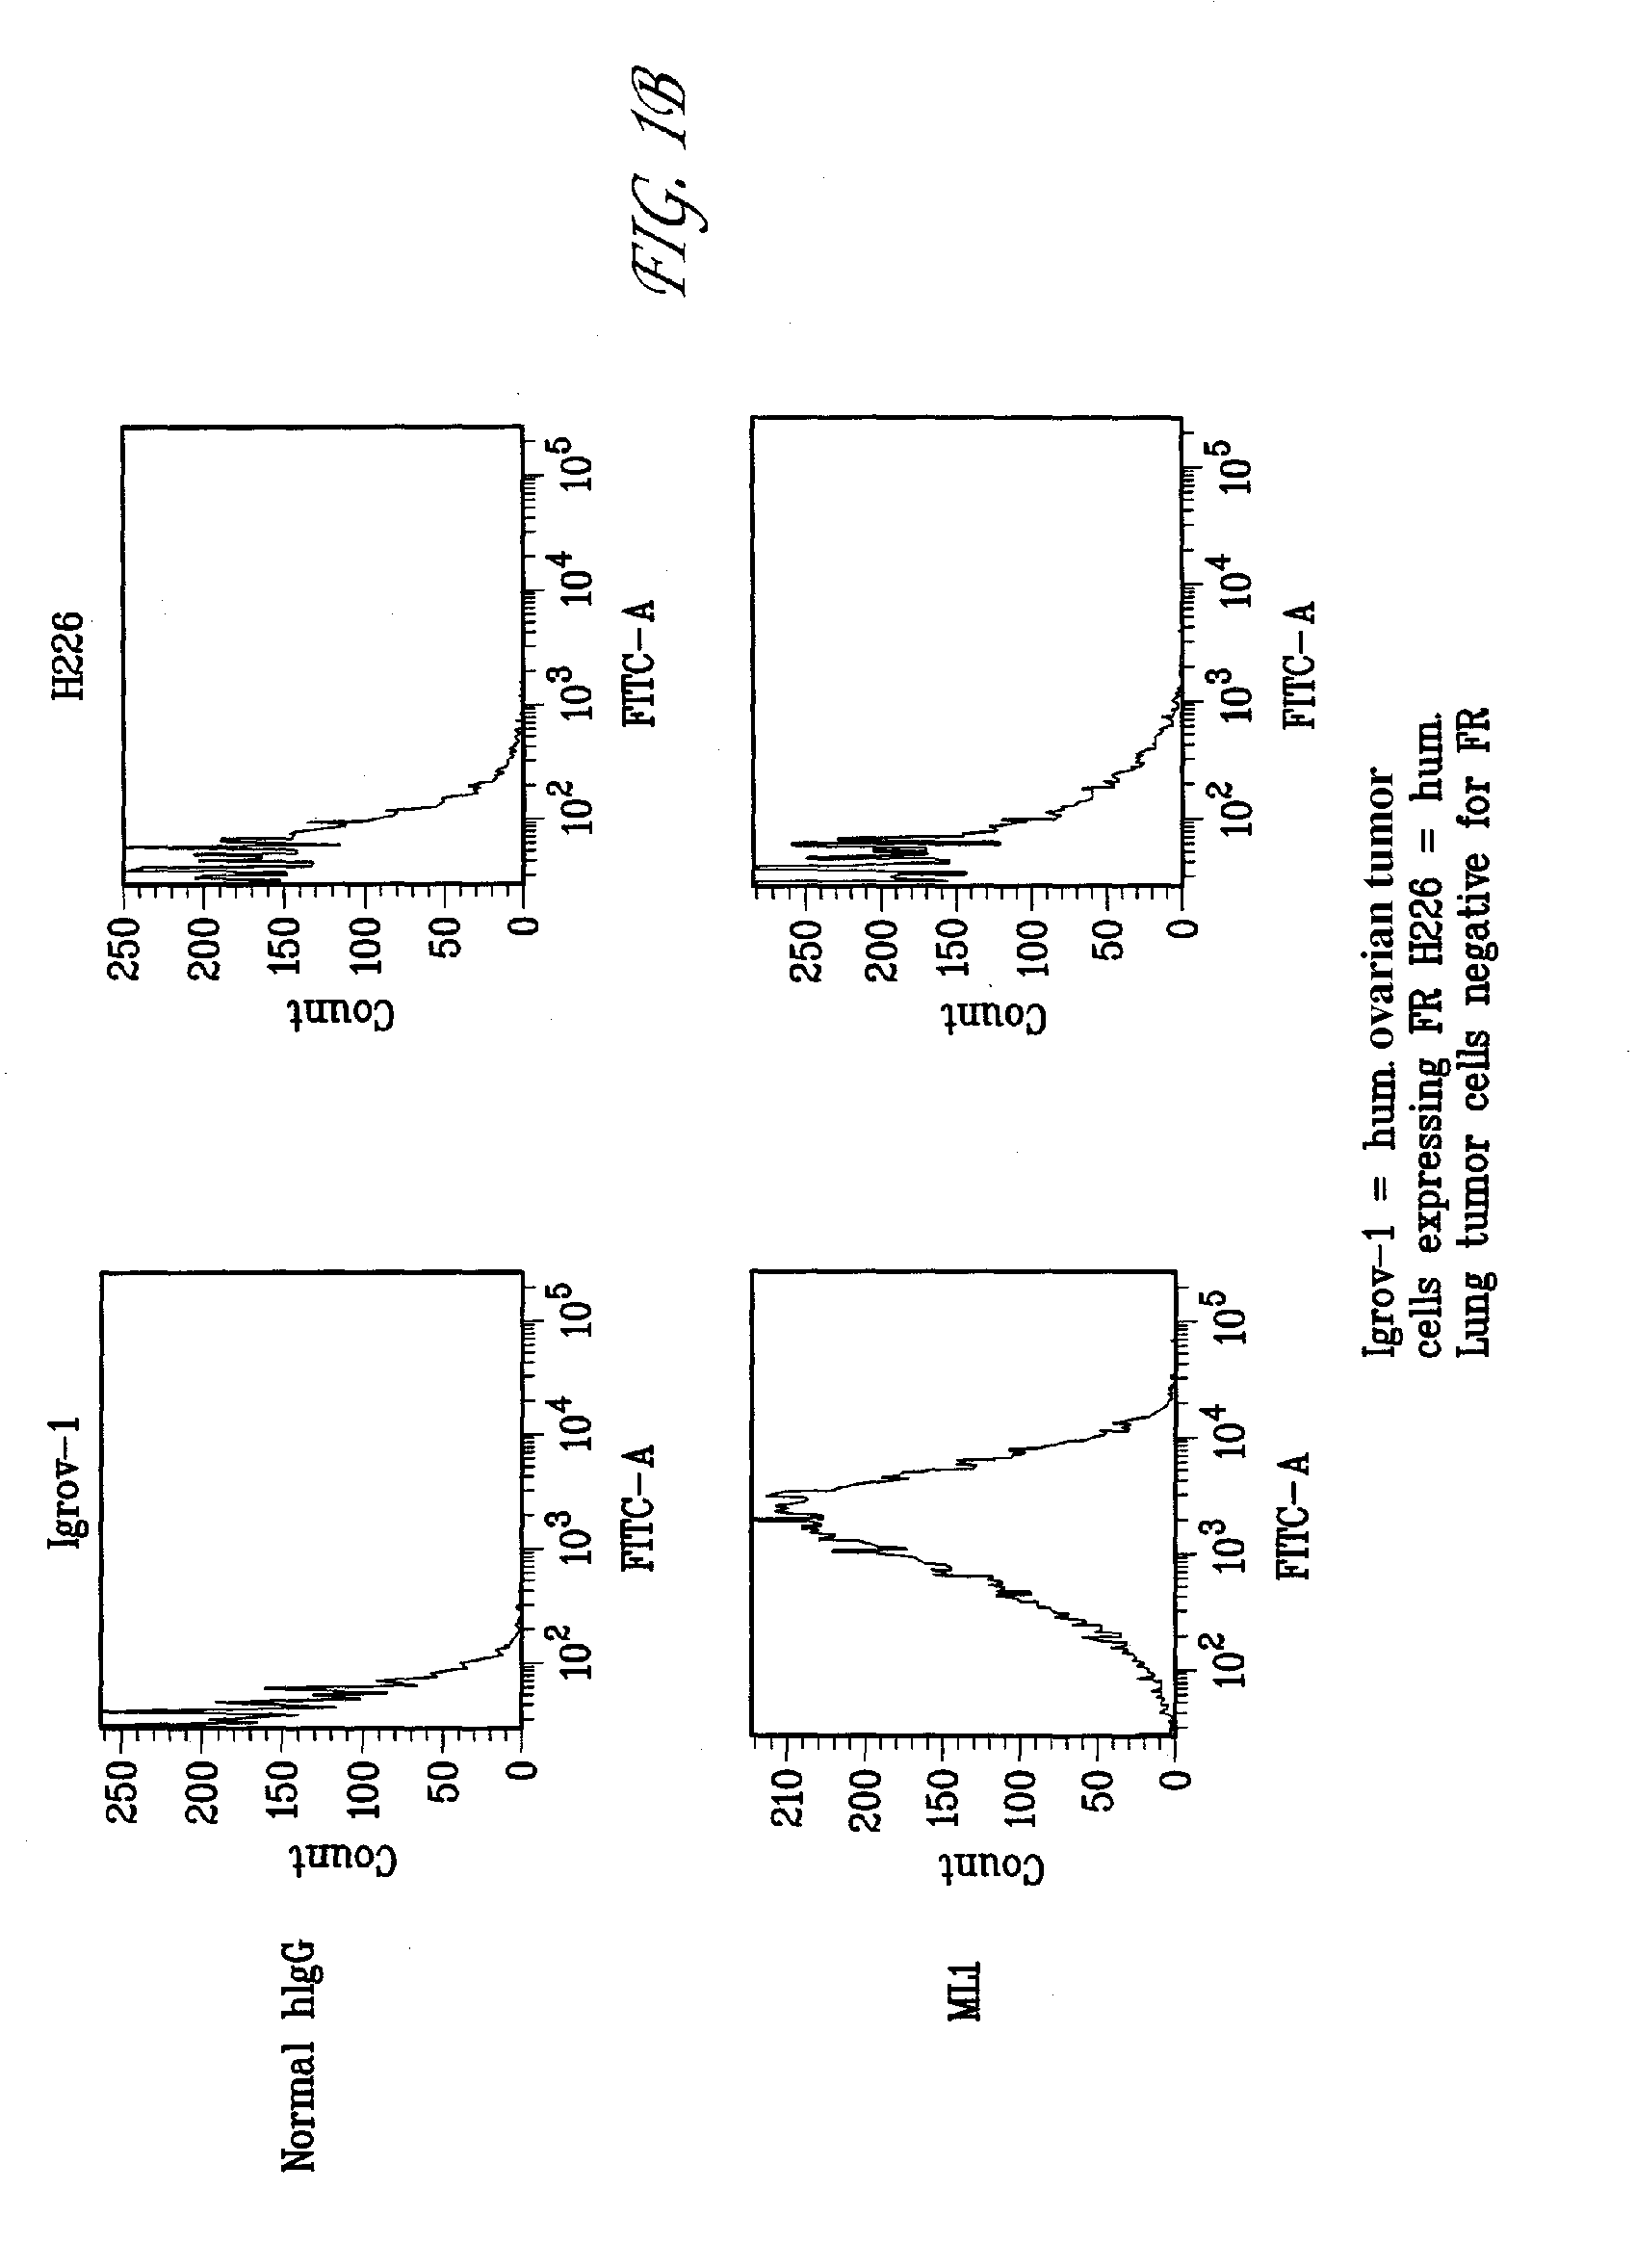 Antibodies With Immune Effector Activity And That Internalize In Folate Receptor Alpha-Positive Cells